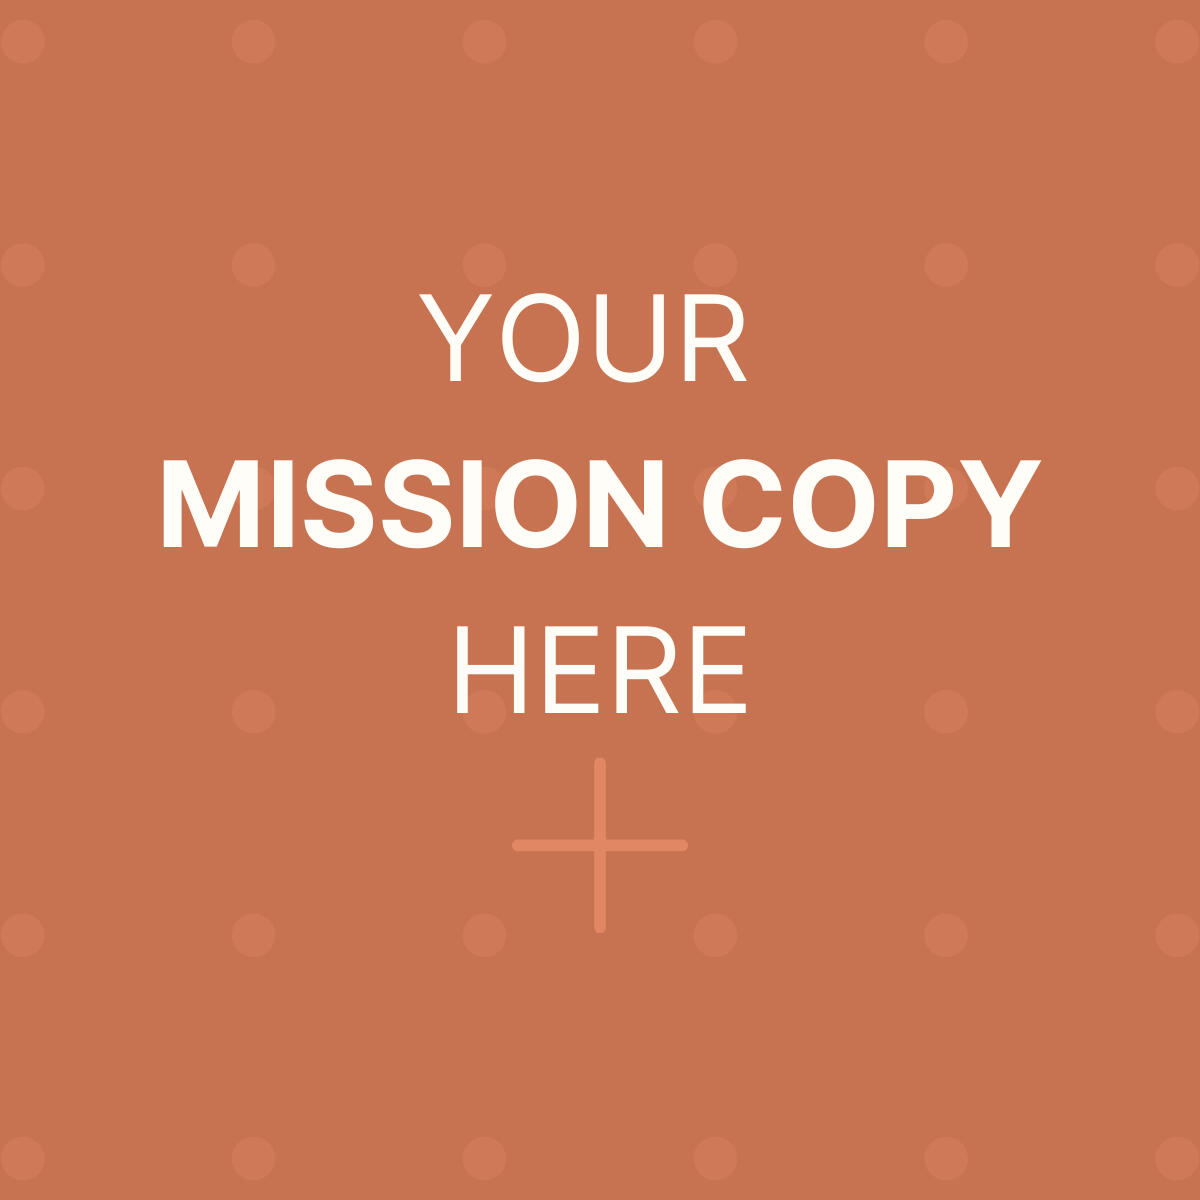 Your Mission Copy Here